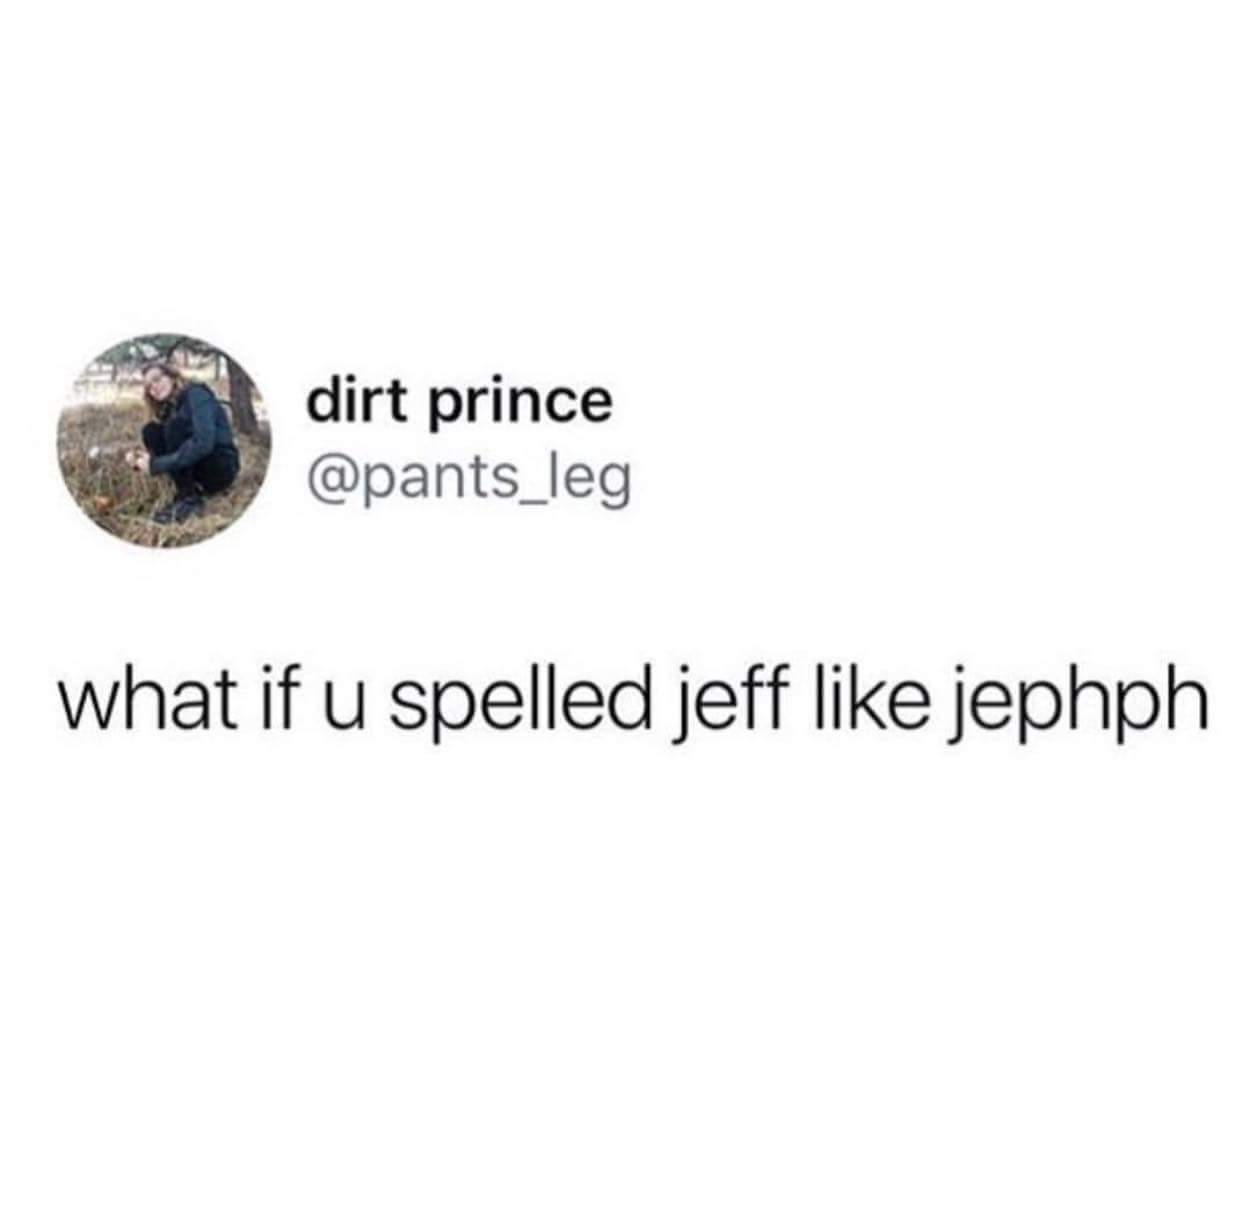 jephph - dirt prince what if u spelled jeff jephph